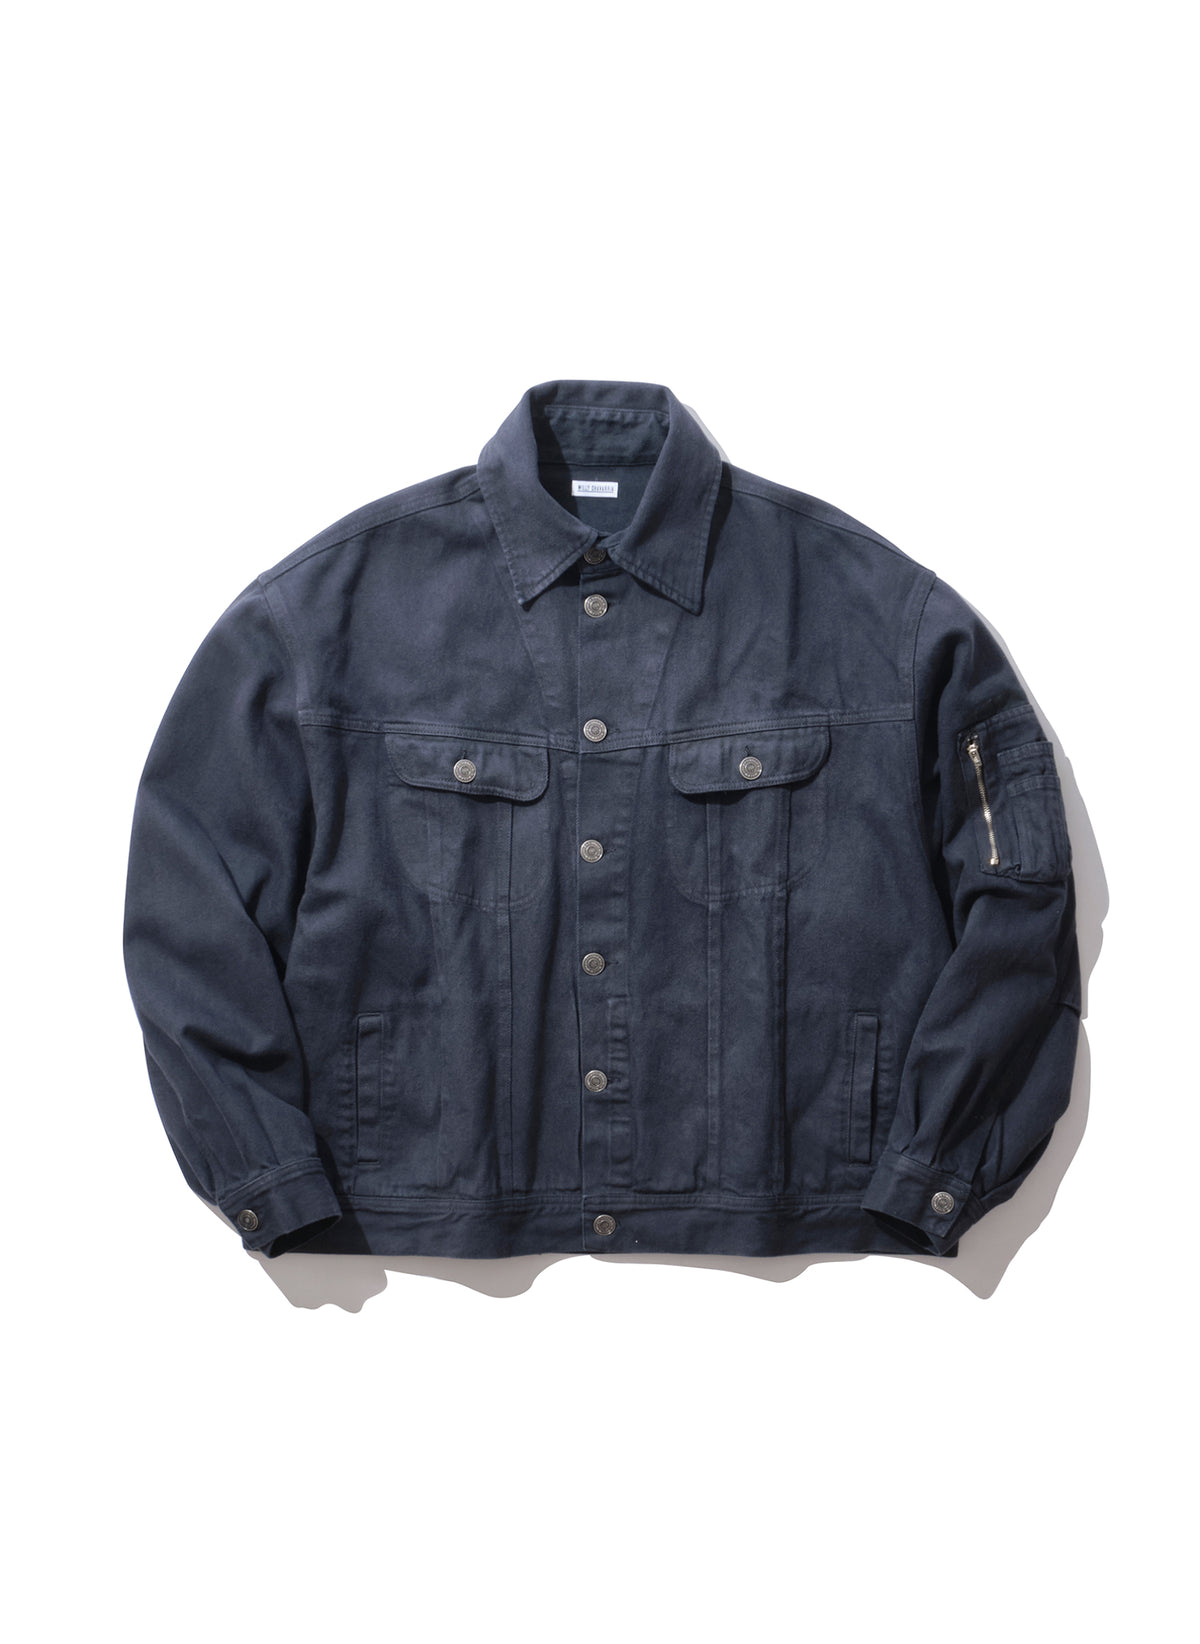 WILLY CHAVARRIA / CHACHI TRUCKER CIGARRETTE POCKET JACKET CHEMICAL WASH BLACK